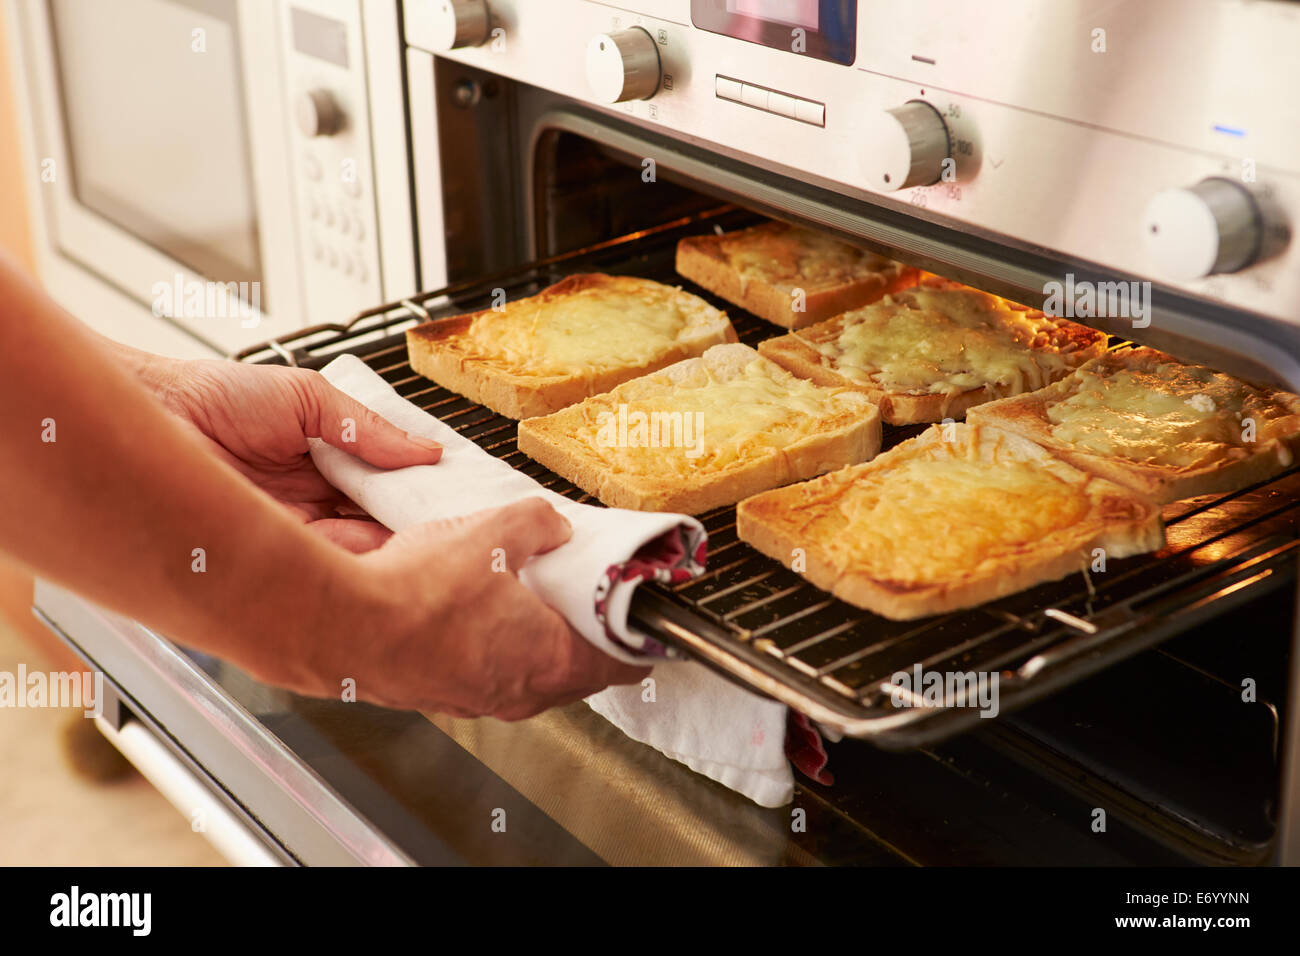 Cheese On Toast Being Grilled In Oven Stock Photo